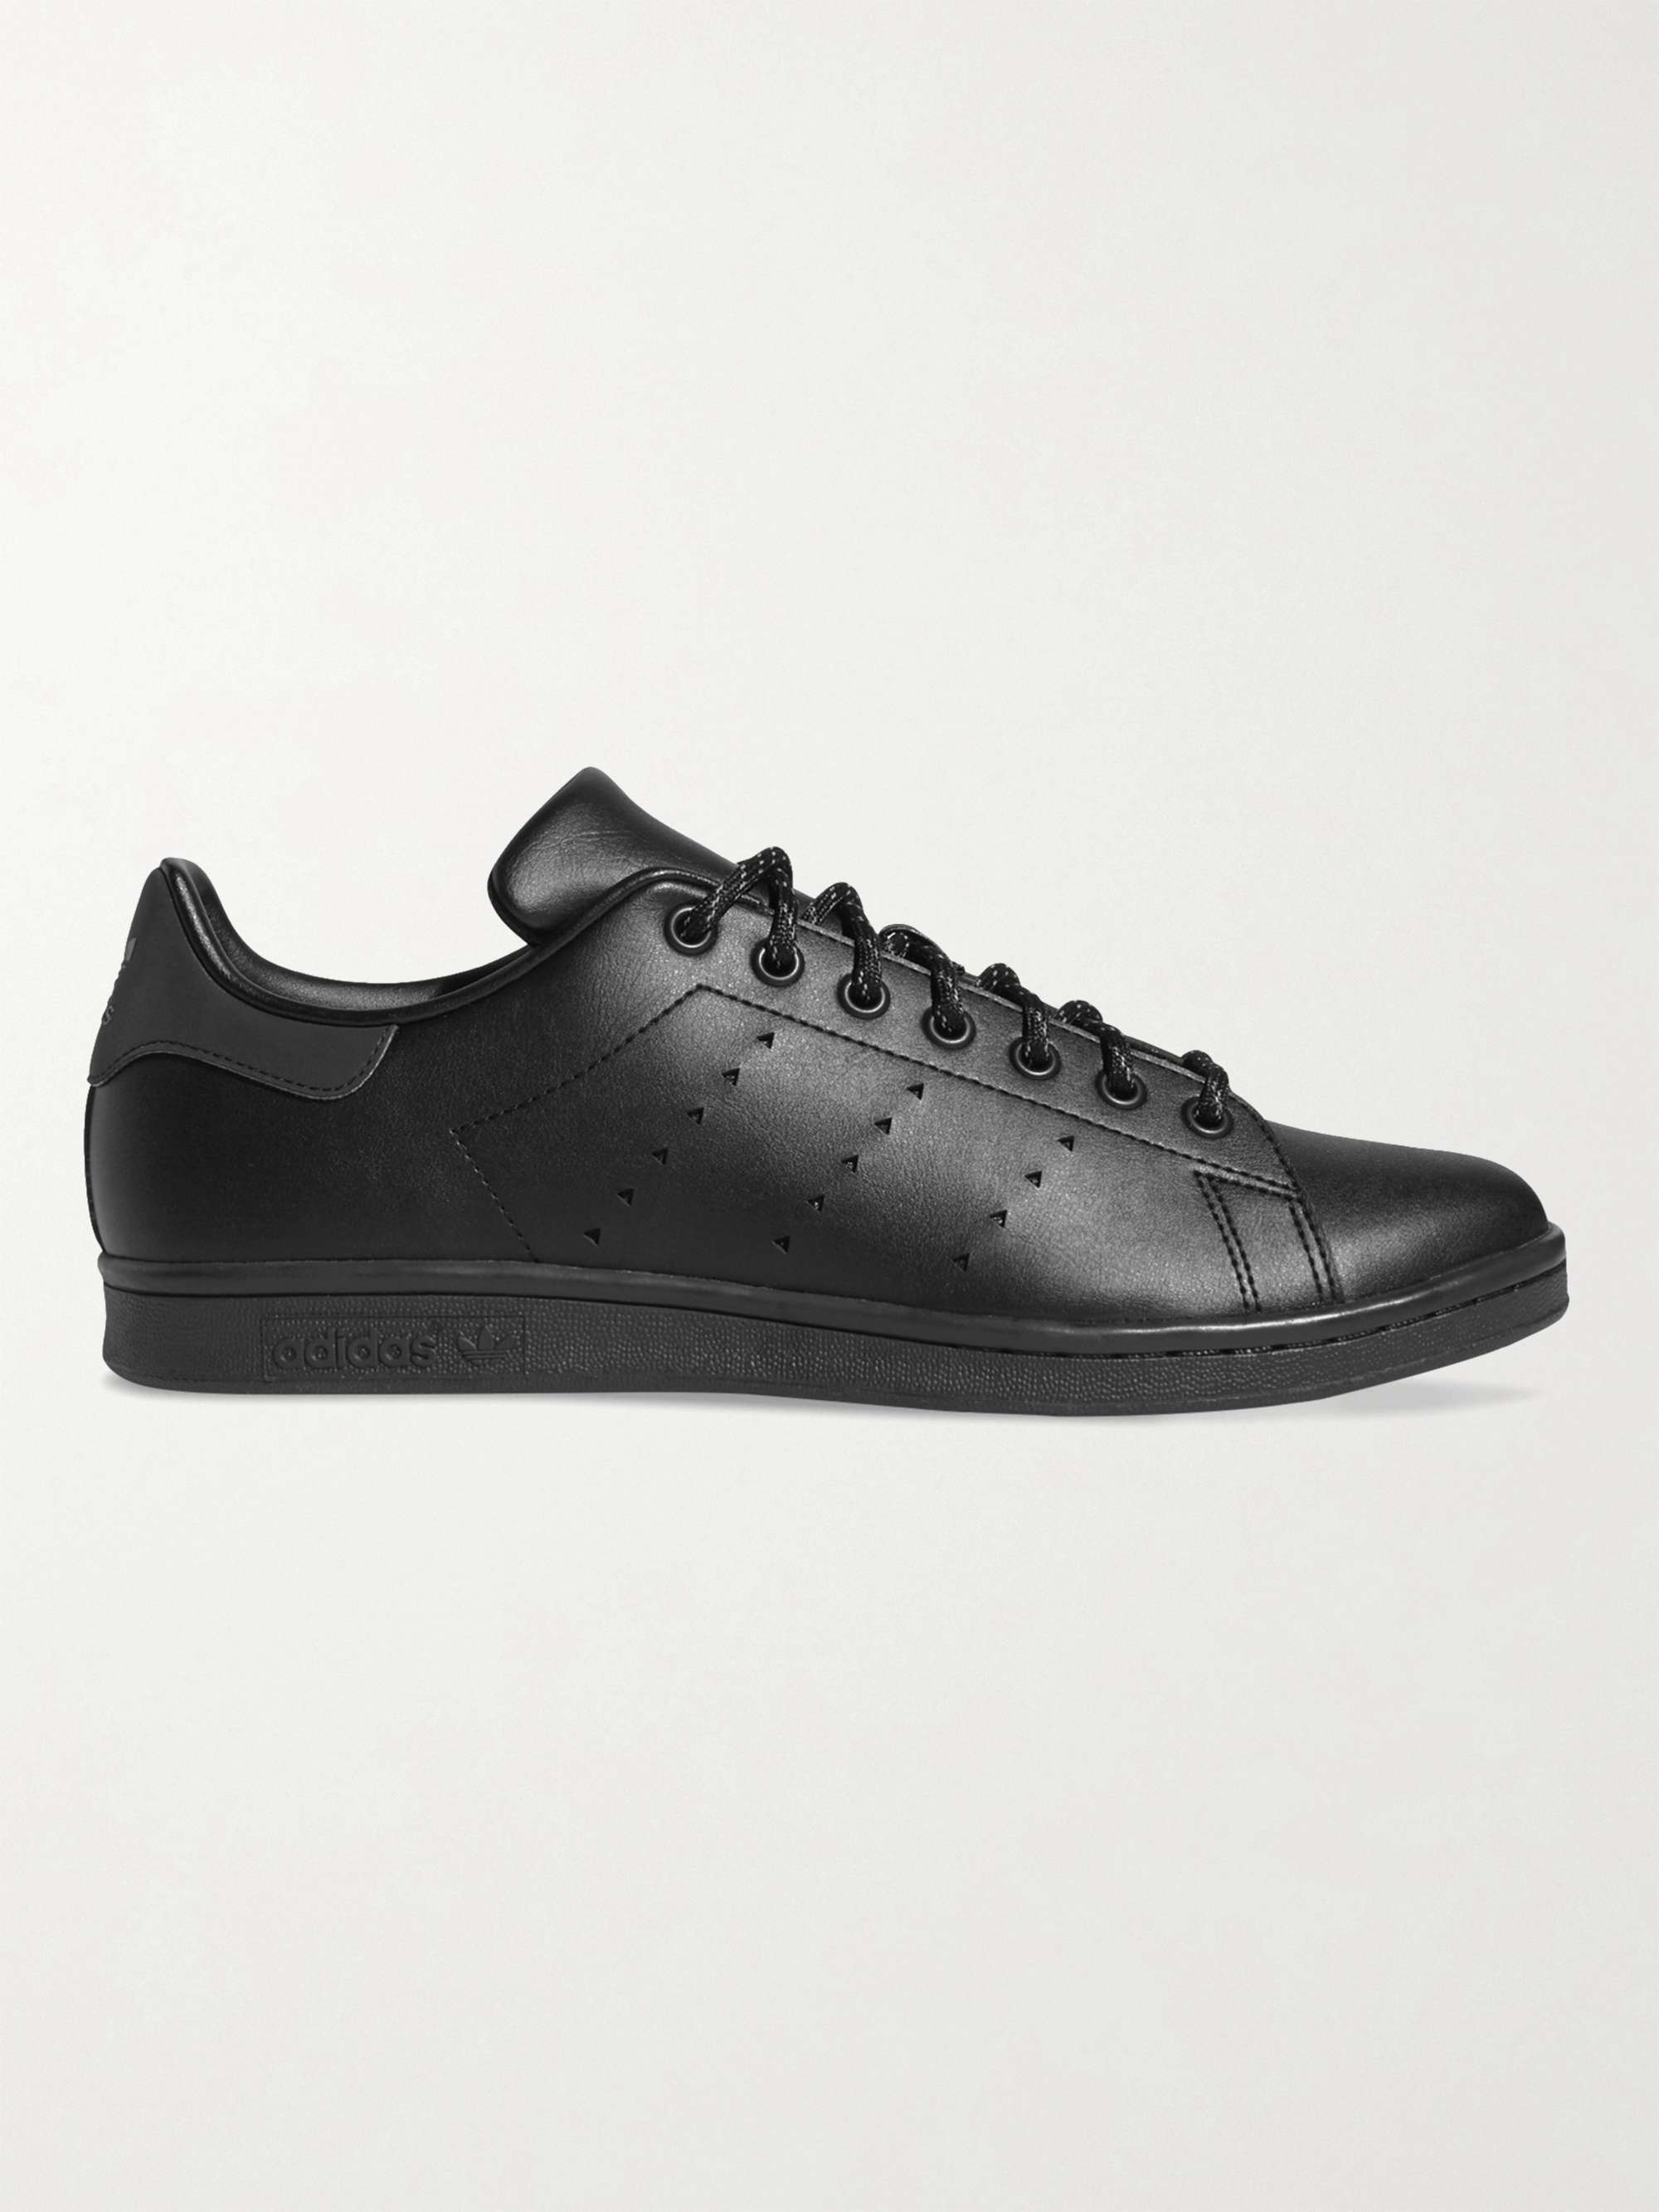 stan smith shoes images